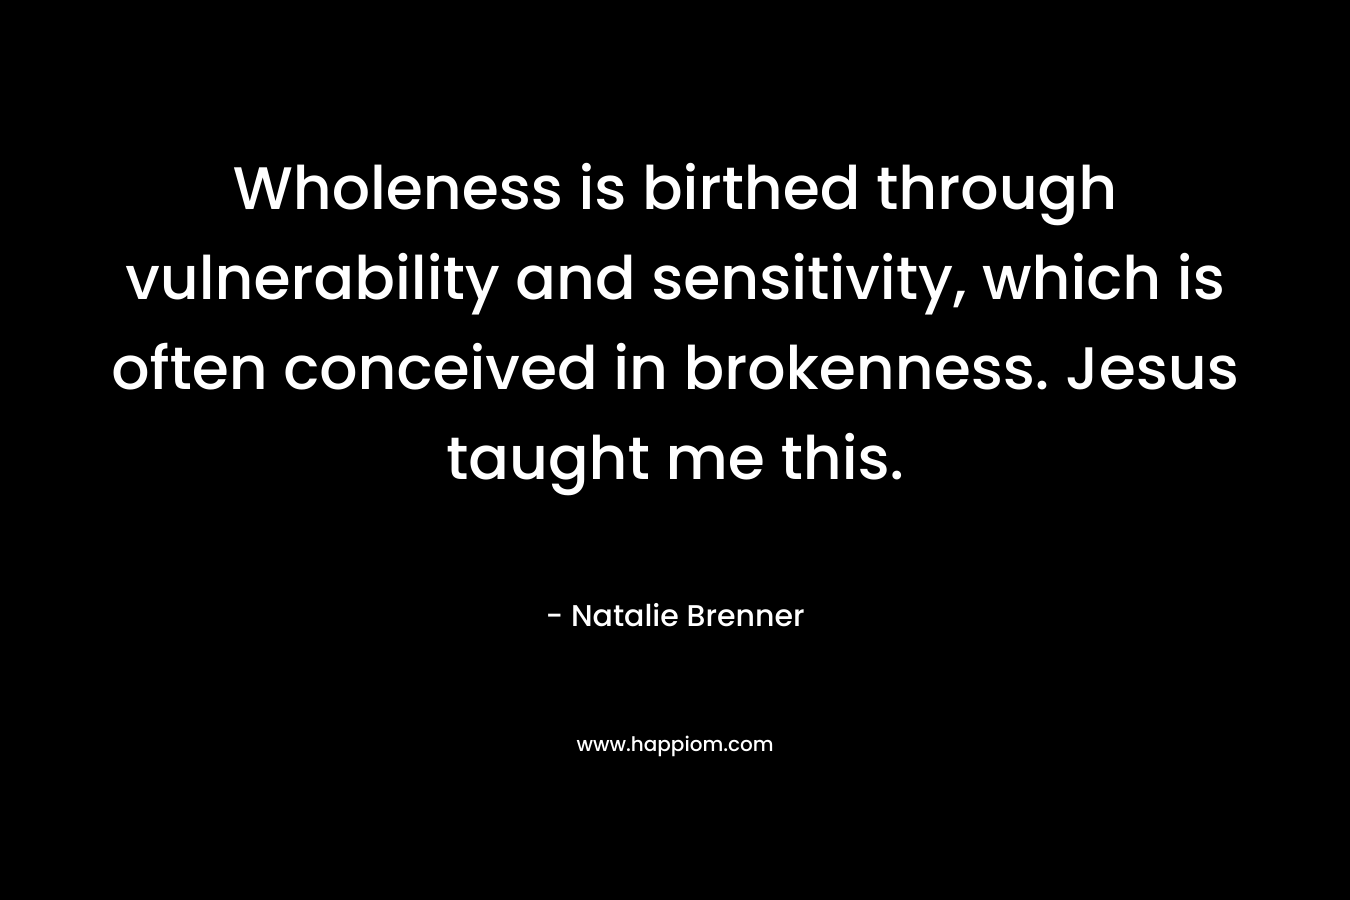 Wholeness is birthed through vulnerability and sensitivity, which is often conceived in brokenness. Jesus taught me this.